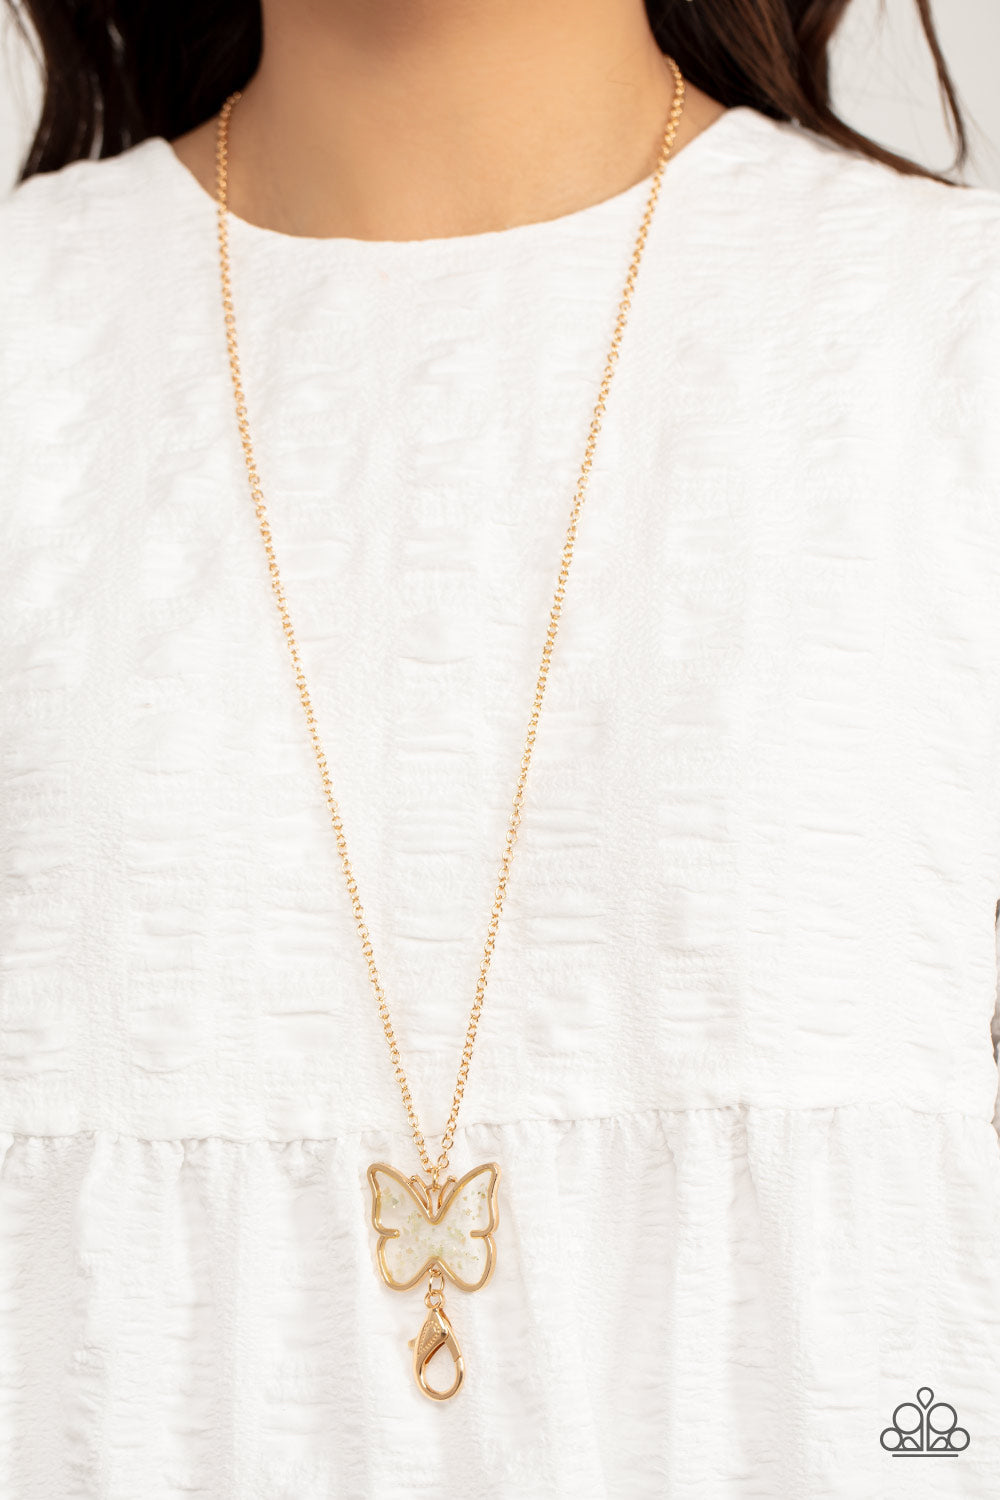 Gives Me Butterflies - gold - Paparazzi LANYARD necklace